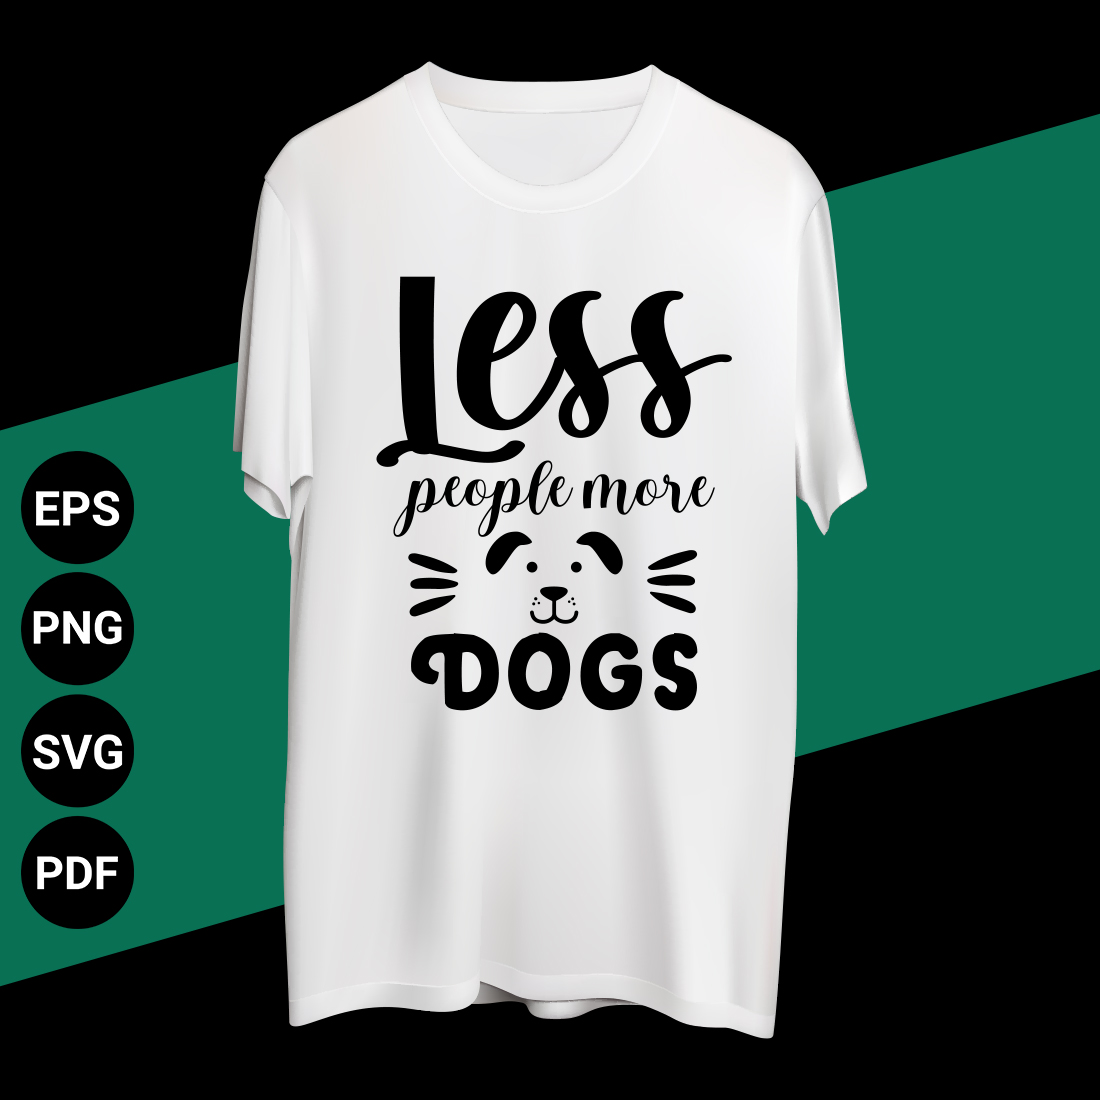 Less people more dogs T-shirt design cover image.